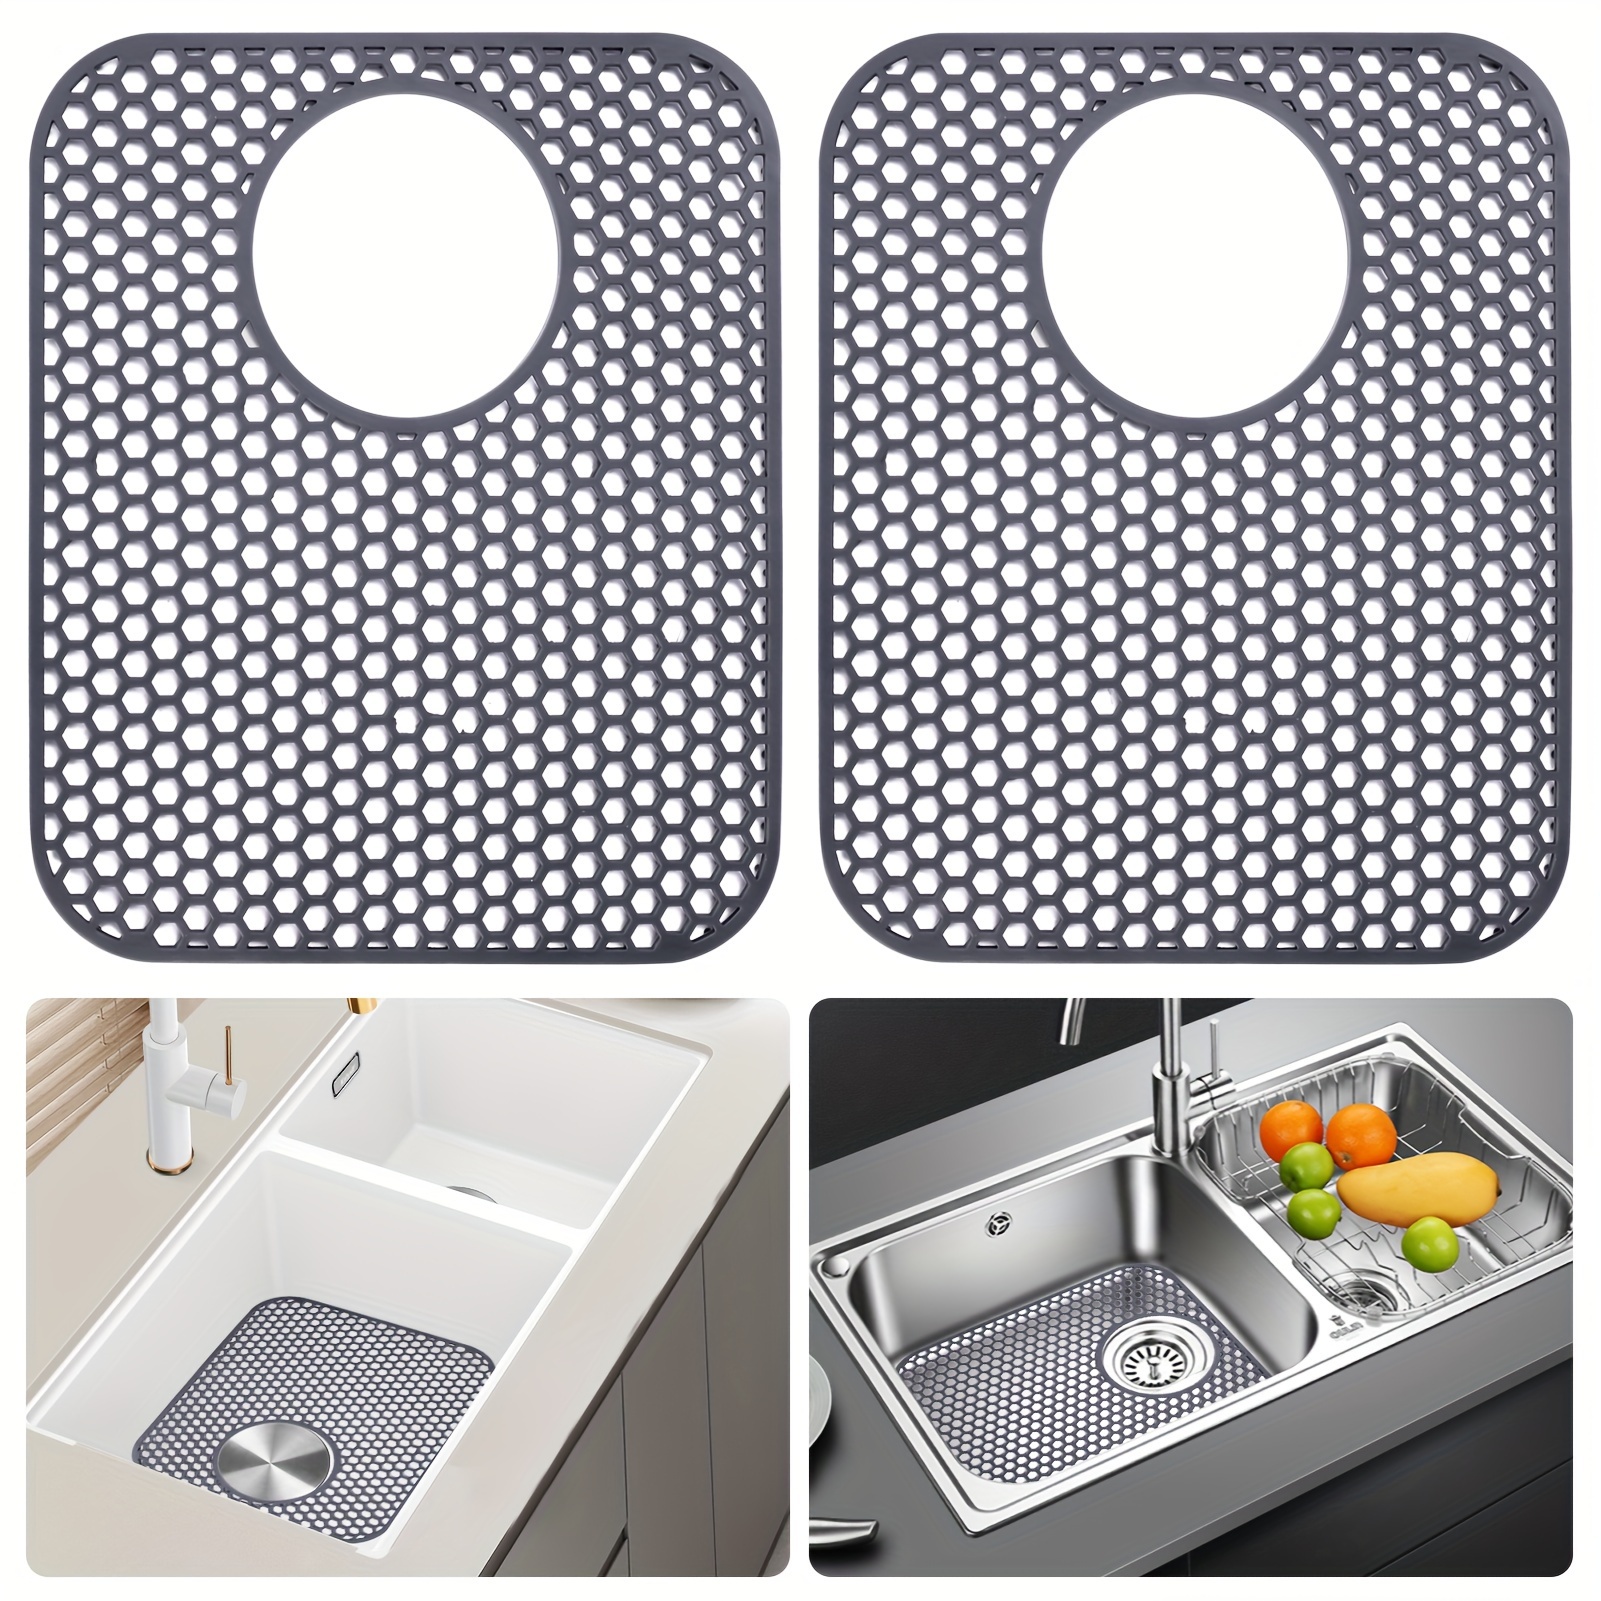 Mat Protector Double Sink Divider Clear Kitchen Dish Safe Durable Grips  Saddle